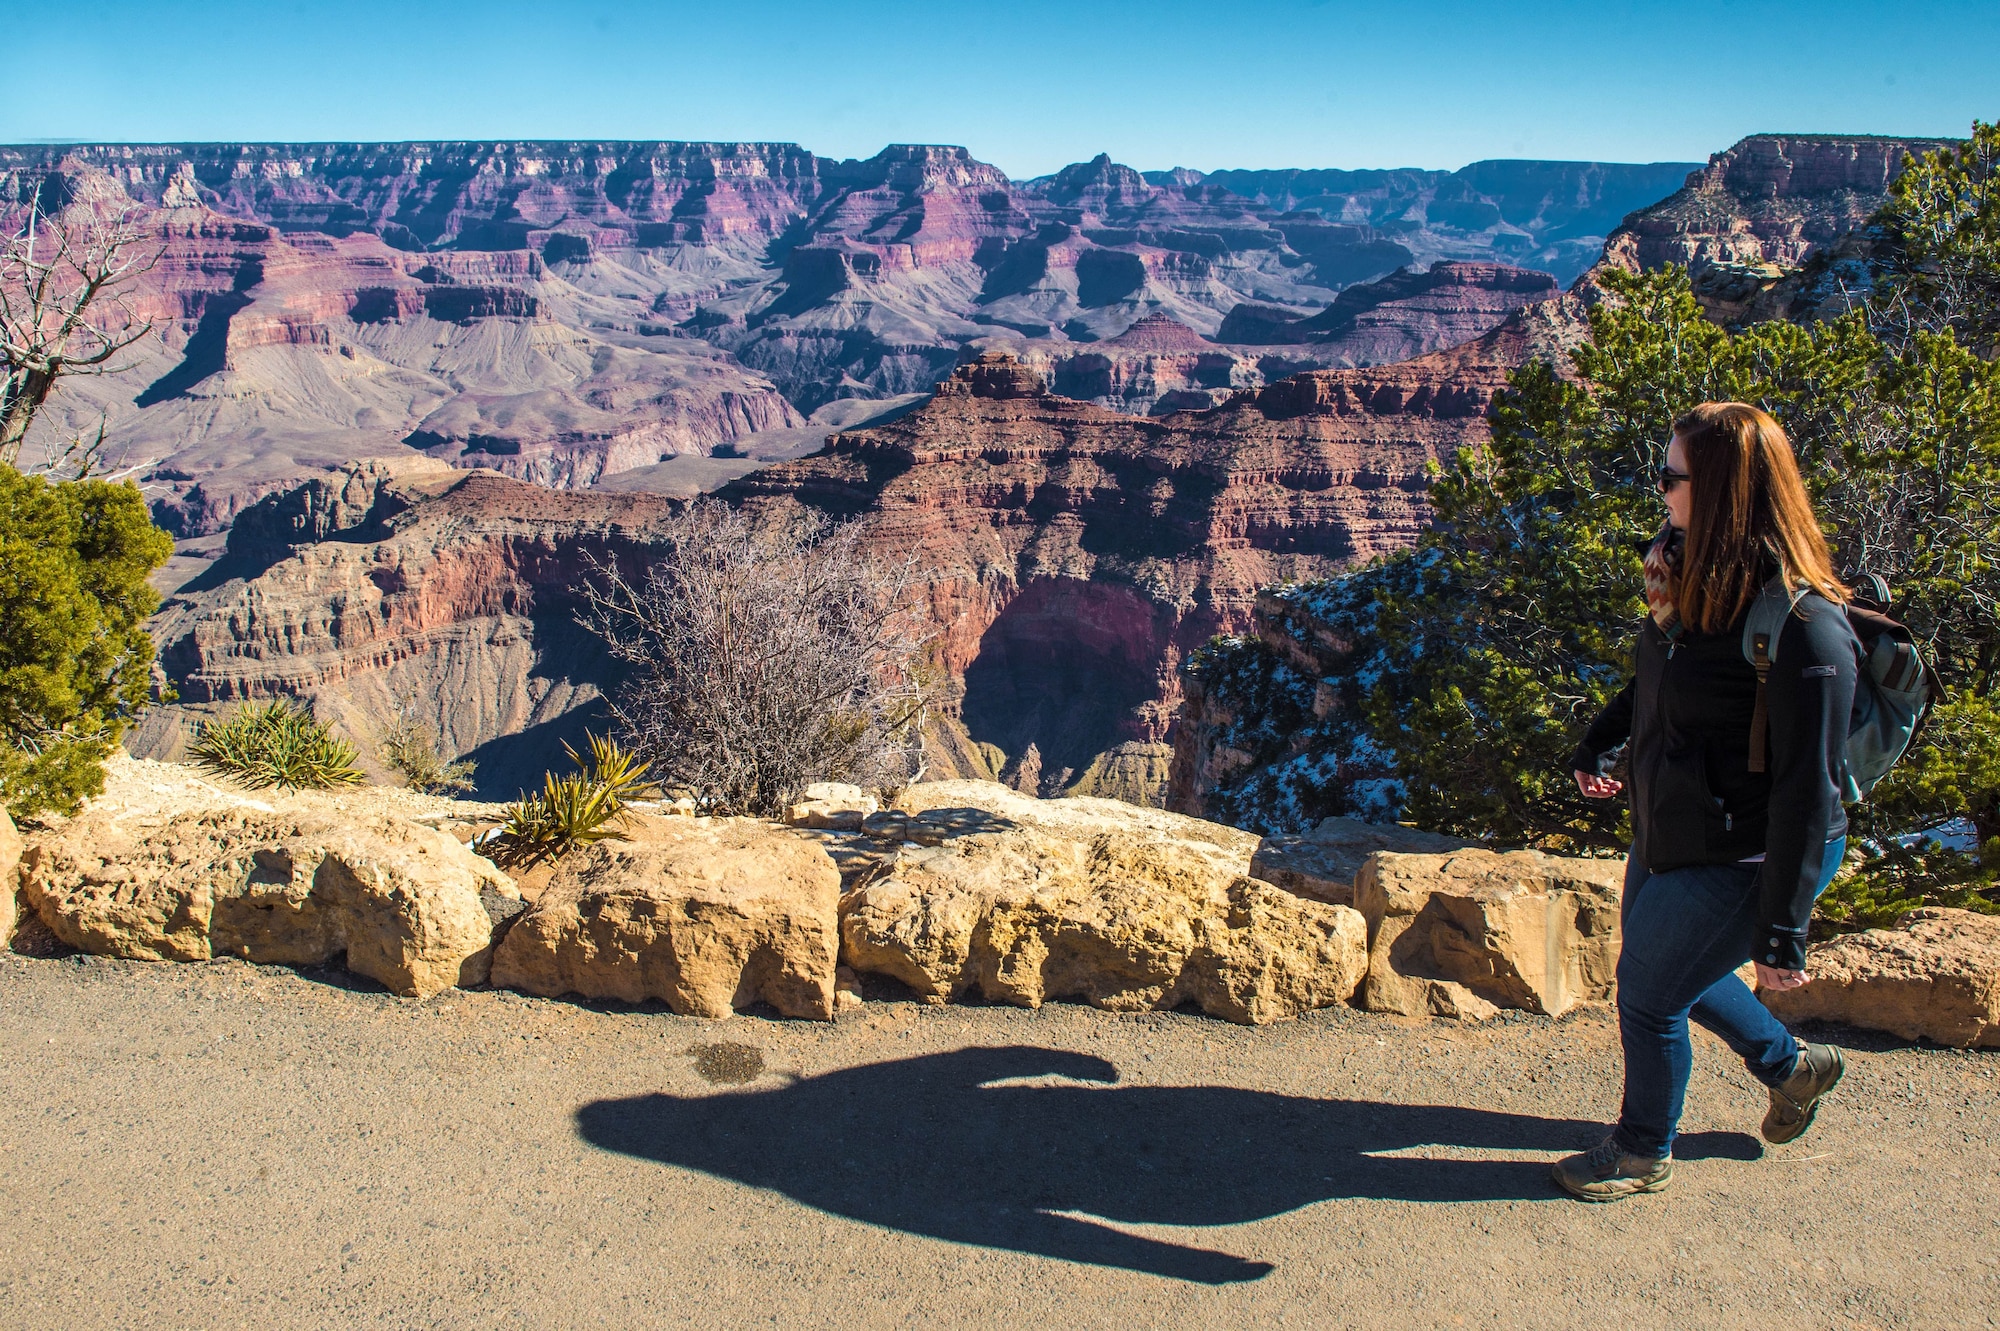 A visitor walks along the south rim of the Grand Canyon in Grand Canyon National Park, Ariz., Jan. 27, 2018. The park is a popular destination for Airmen assigned to Luke Air Force Base offering scenic views, hiking trails and much more. (U.S. Air Force photo/Airman 1st Class Caleb Worpel)